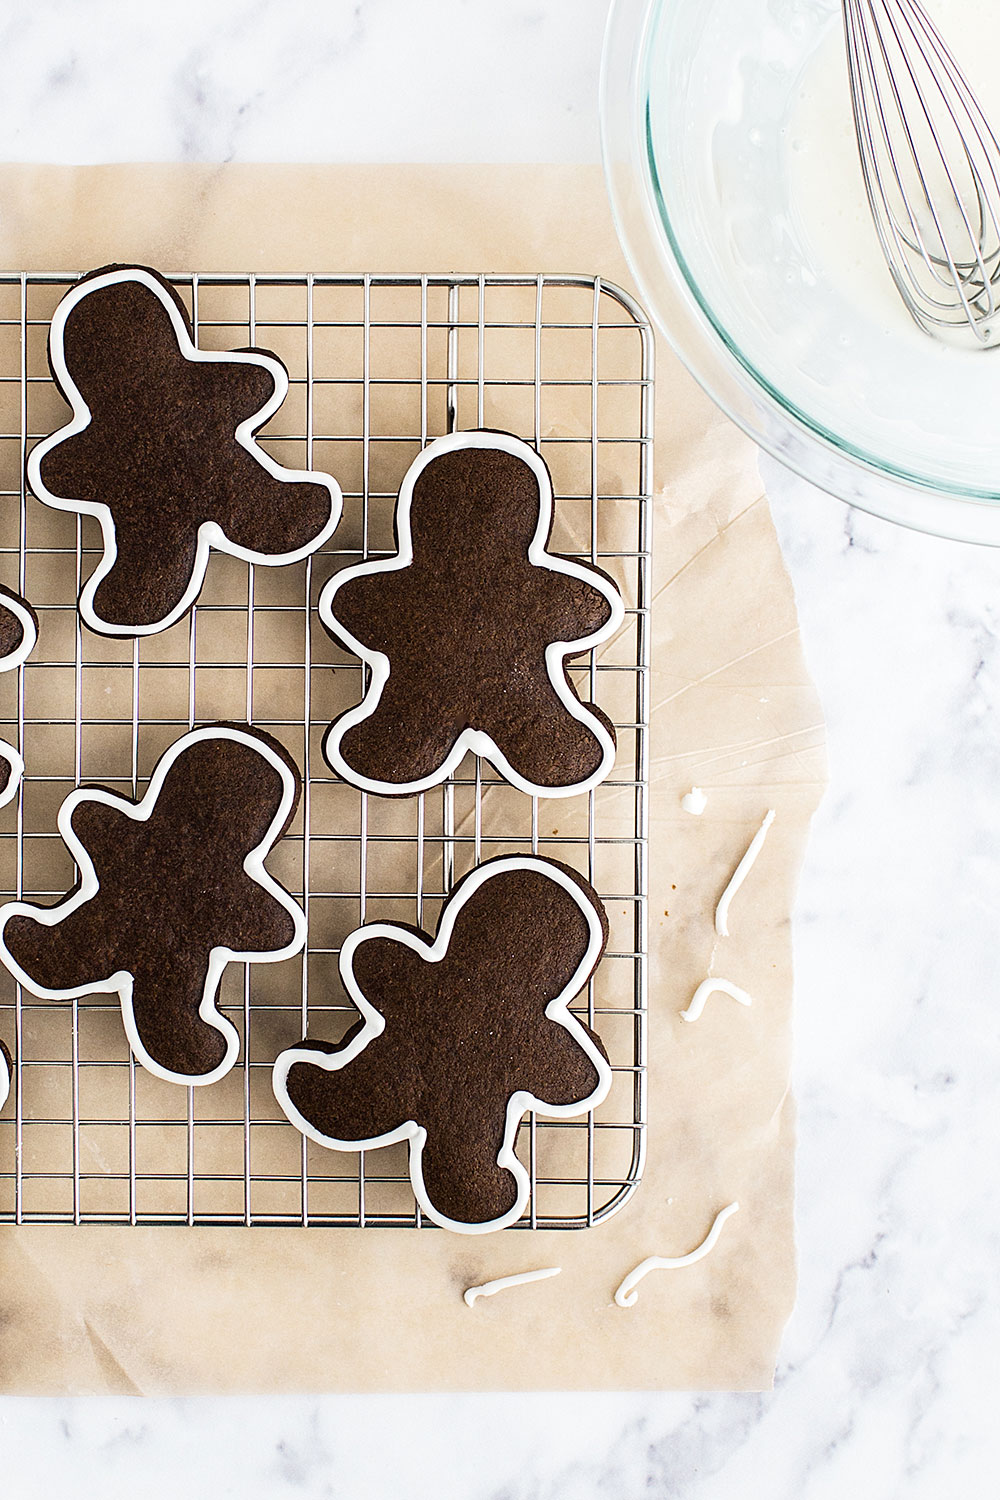 Gingerbread Men Cookies on a cooling rack, with white icing being piped on.